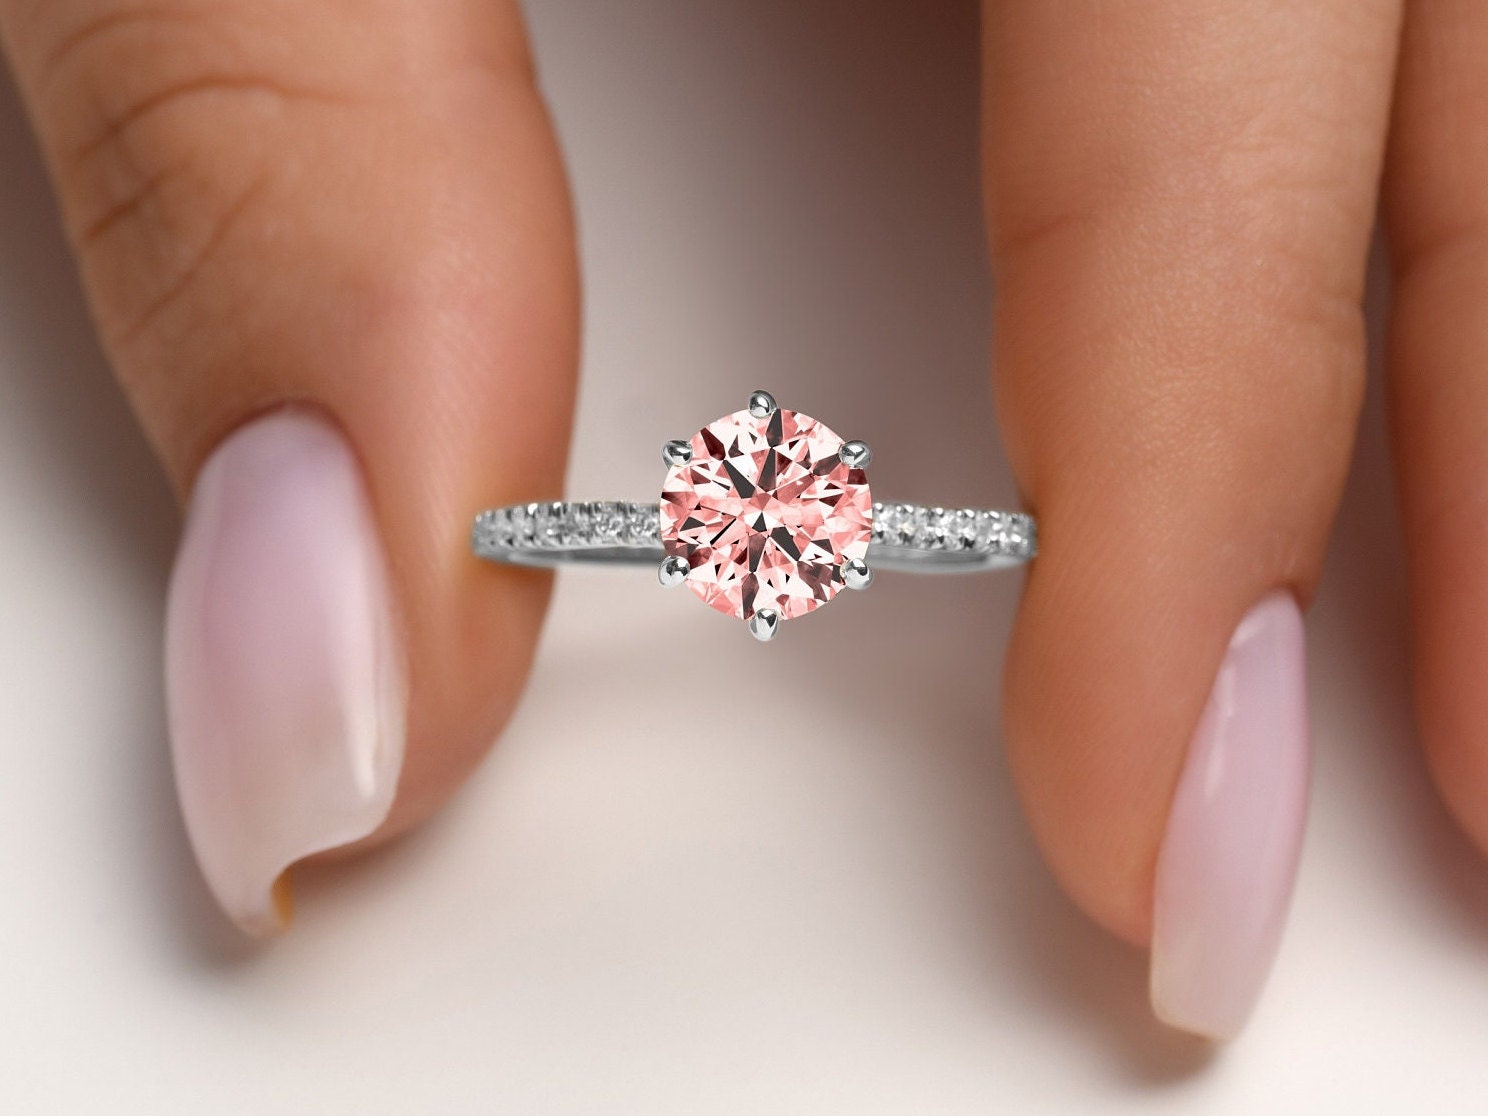 36 Pink Diamond Engagement Rings That Make a Real Statement